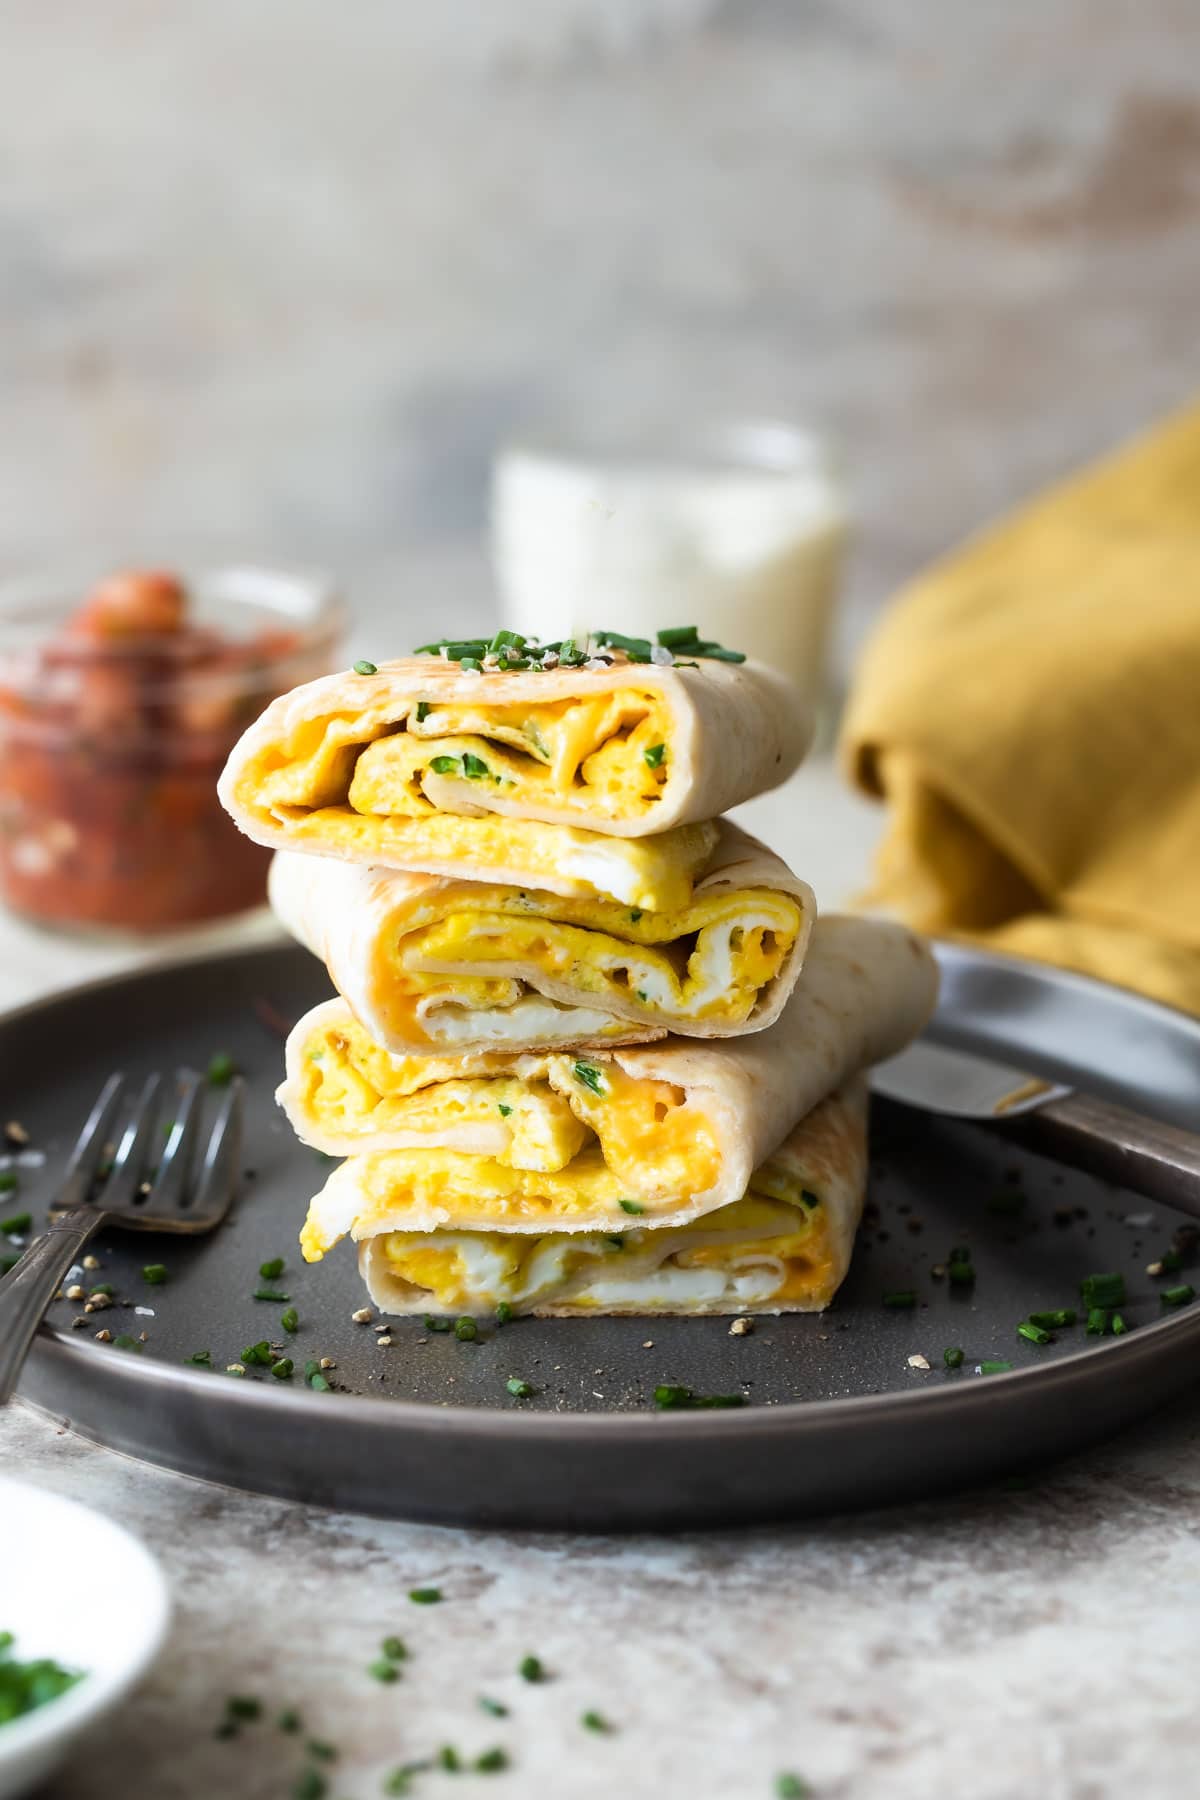 Egg burritos stacked on a gray plate.